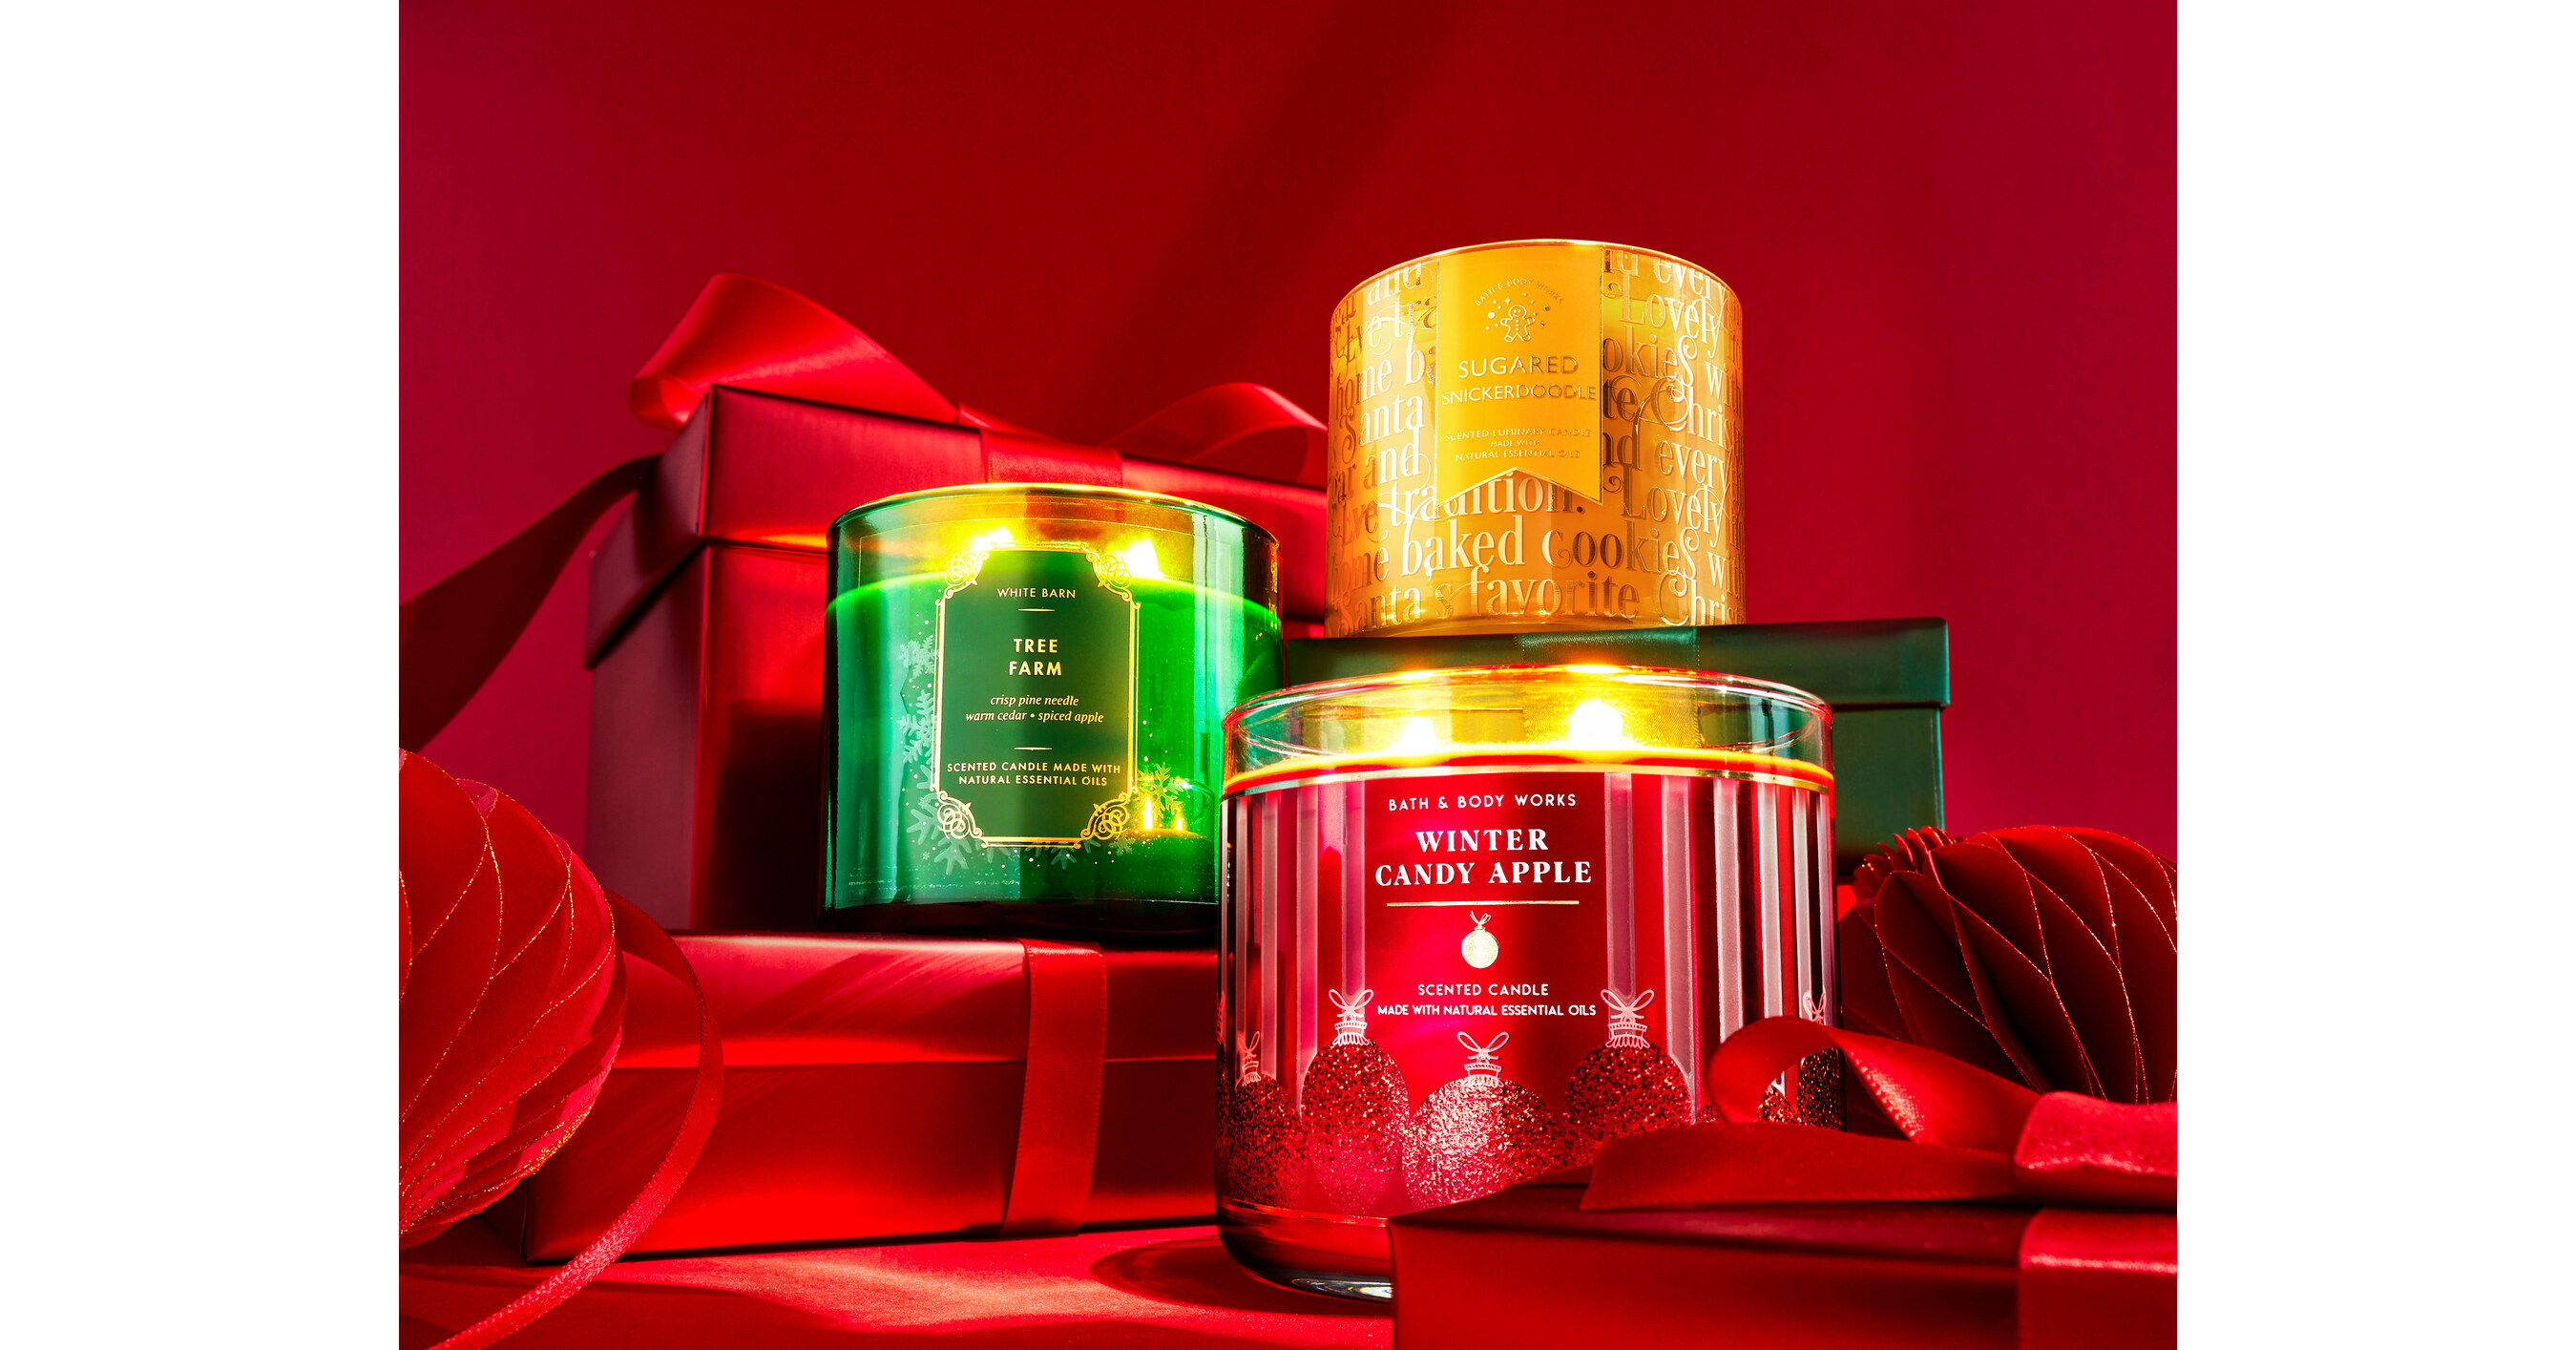 BATH & BODY WORKS BRINGS BACK ANNUAL CANDLE DAY WITH ALLDAY LOYALTY